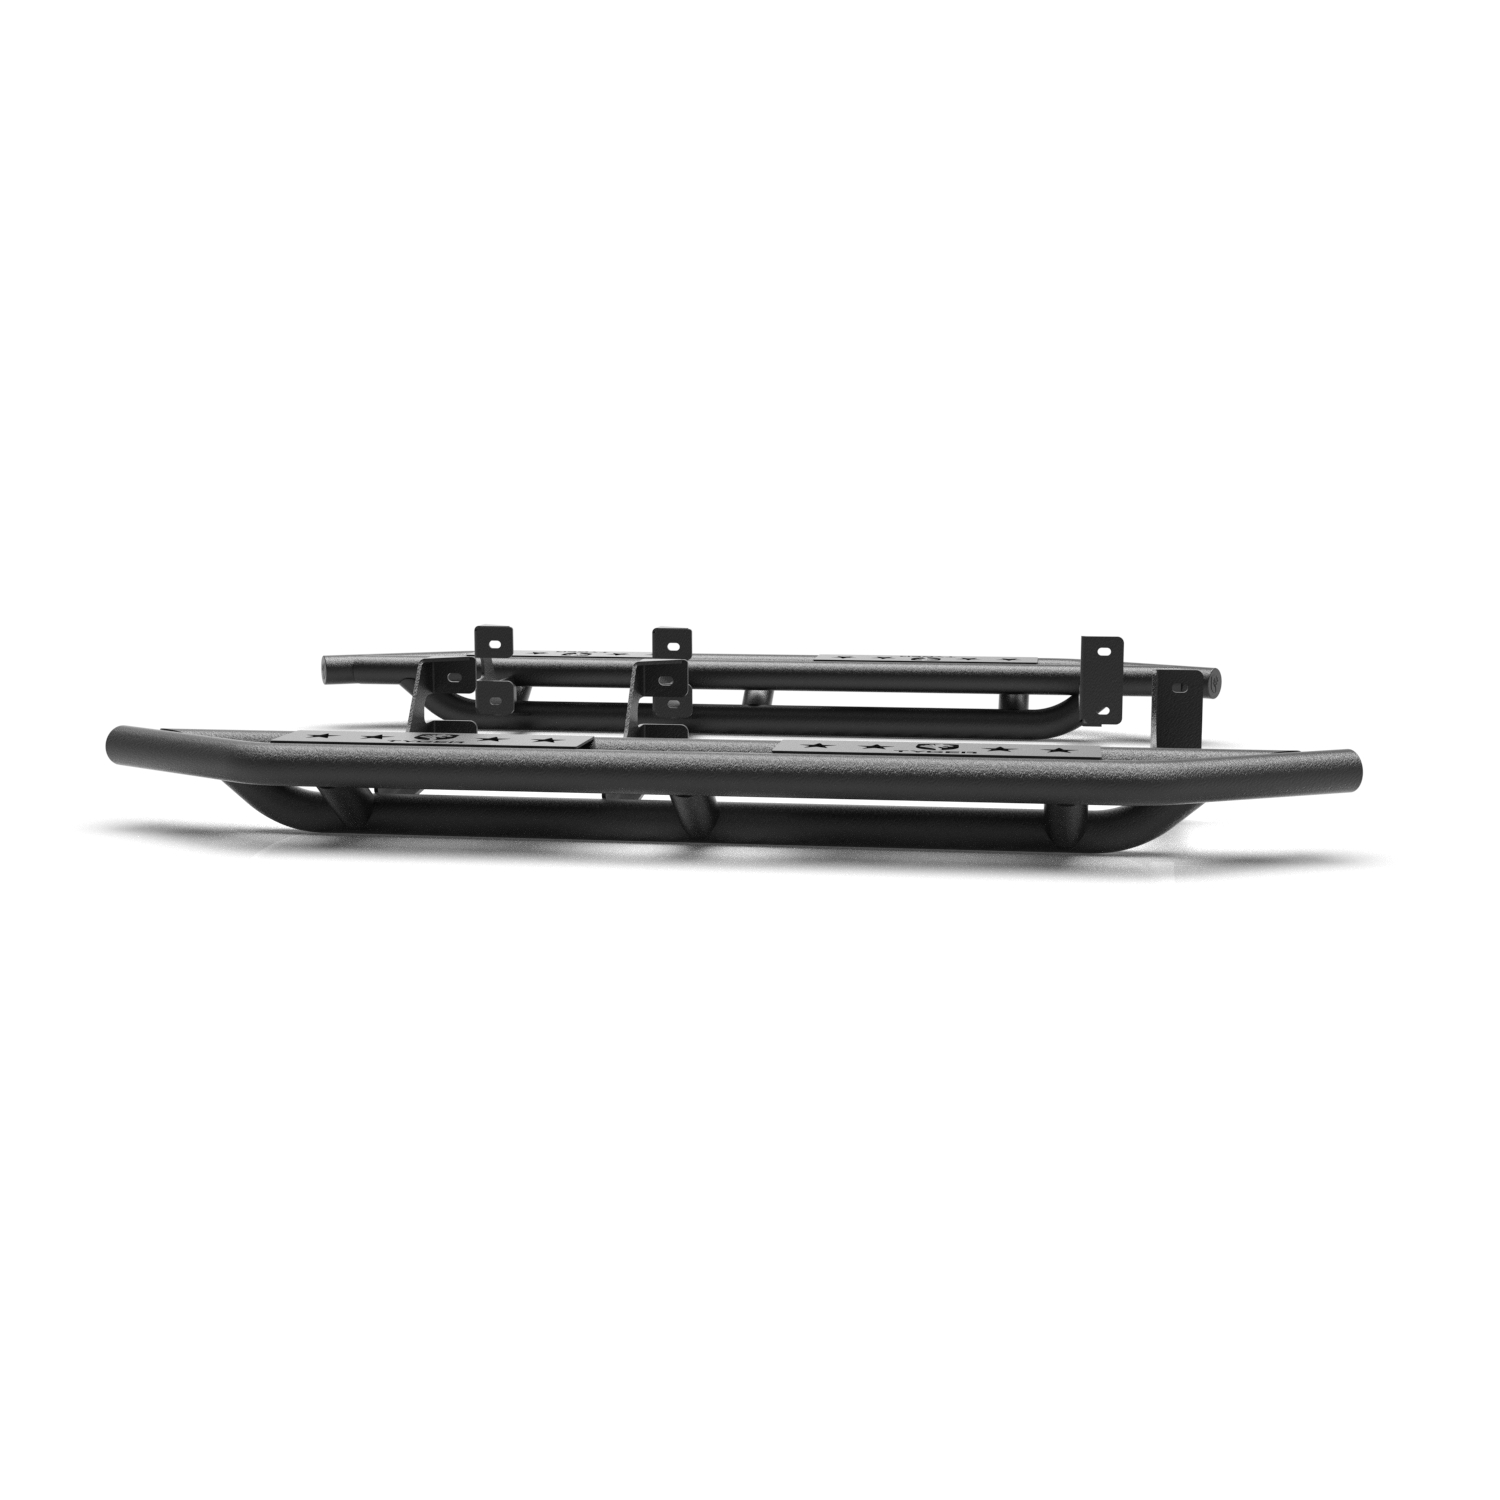 Tyger Auto Bars FJ Compatible Side Cruiser SUV | Star TG-AM2T20068 | Rails Armor Nerf 2007-2014 Boards Toyota Step Running with